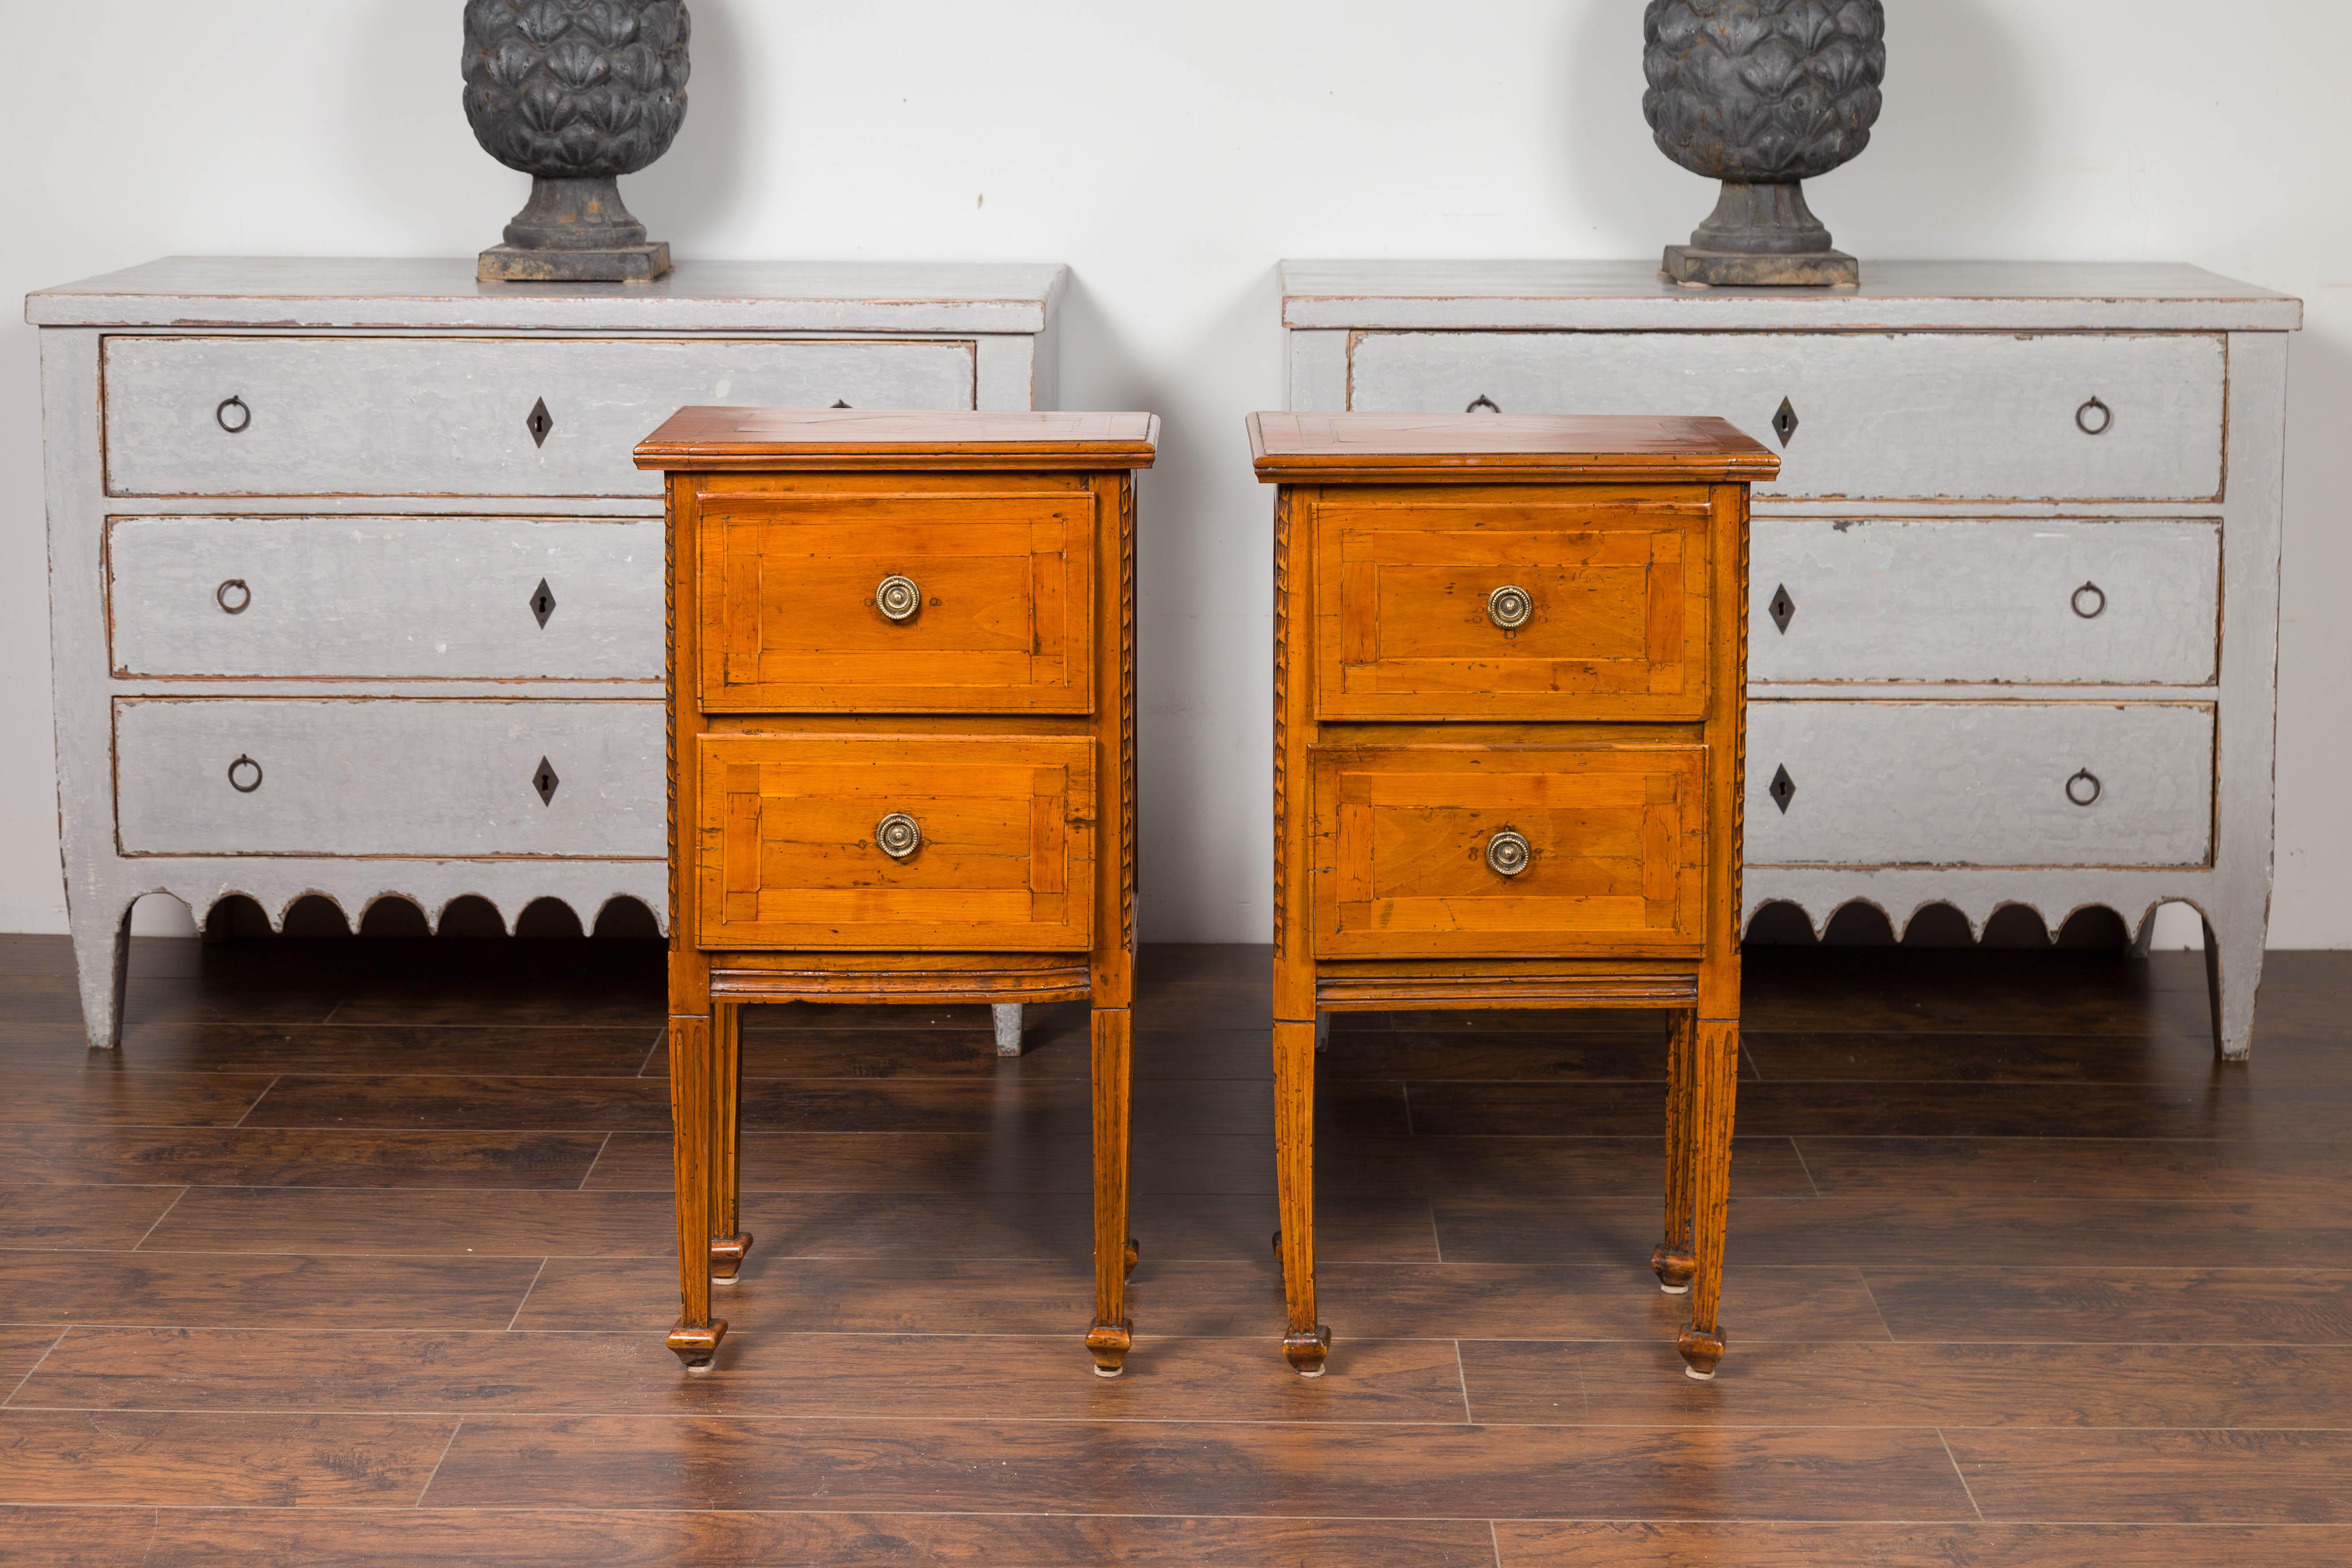 A pair of Italian neoclassical walnut bedside tables from the early 19th century, with banding and fluted tapering legs. Born in Italy during the first quarter of the 19th century, each of this pair of bedside tables features a rectangular top